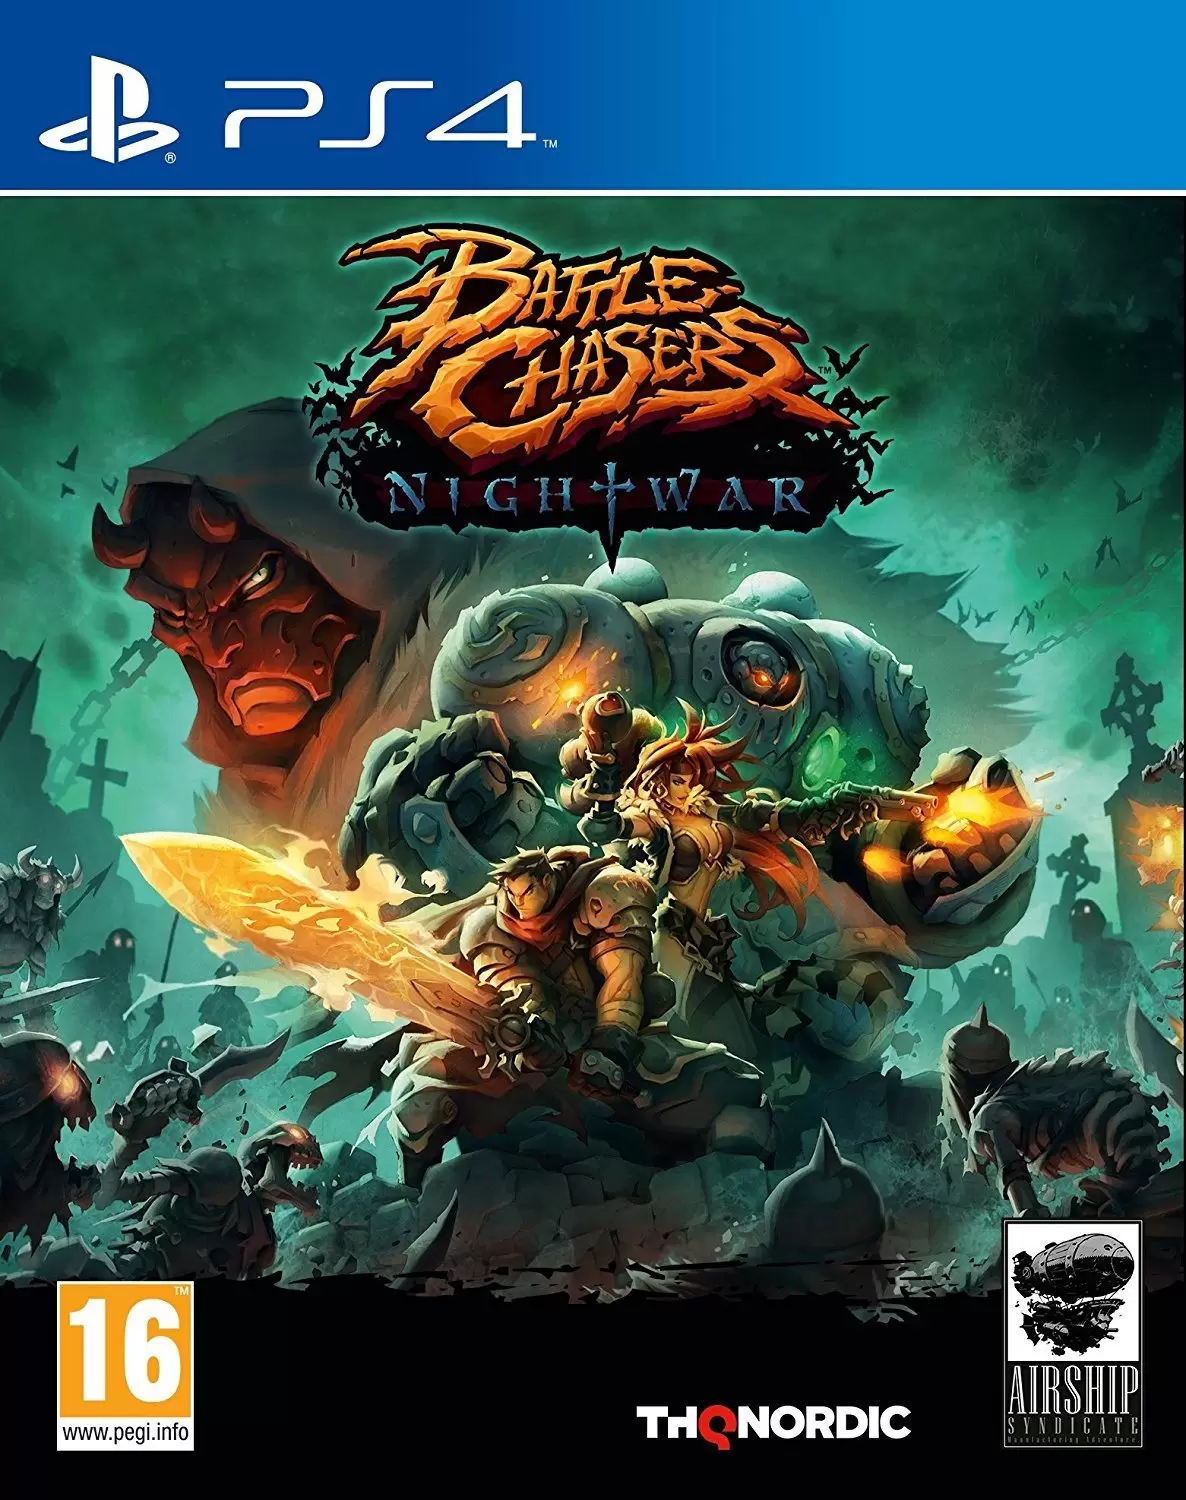 PS4 Games - Battle Chasers : Nightwar